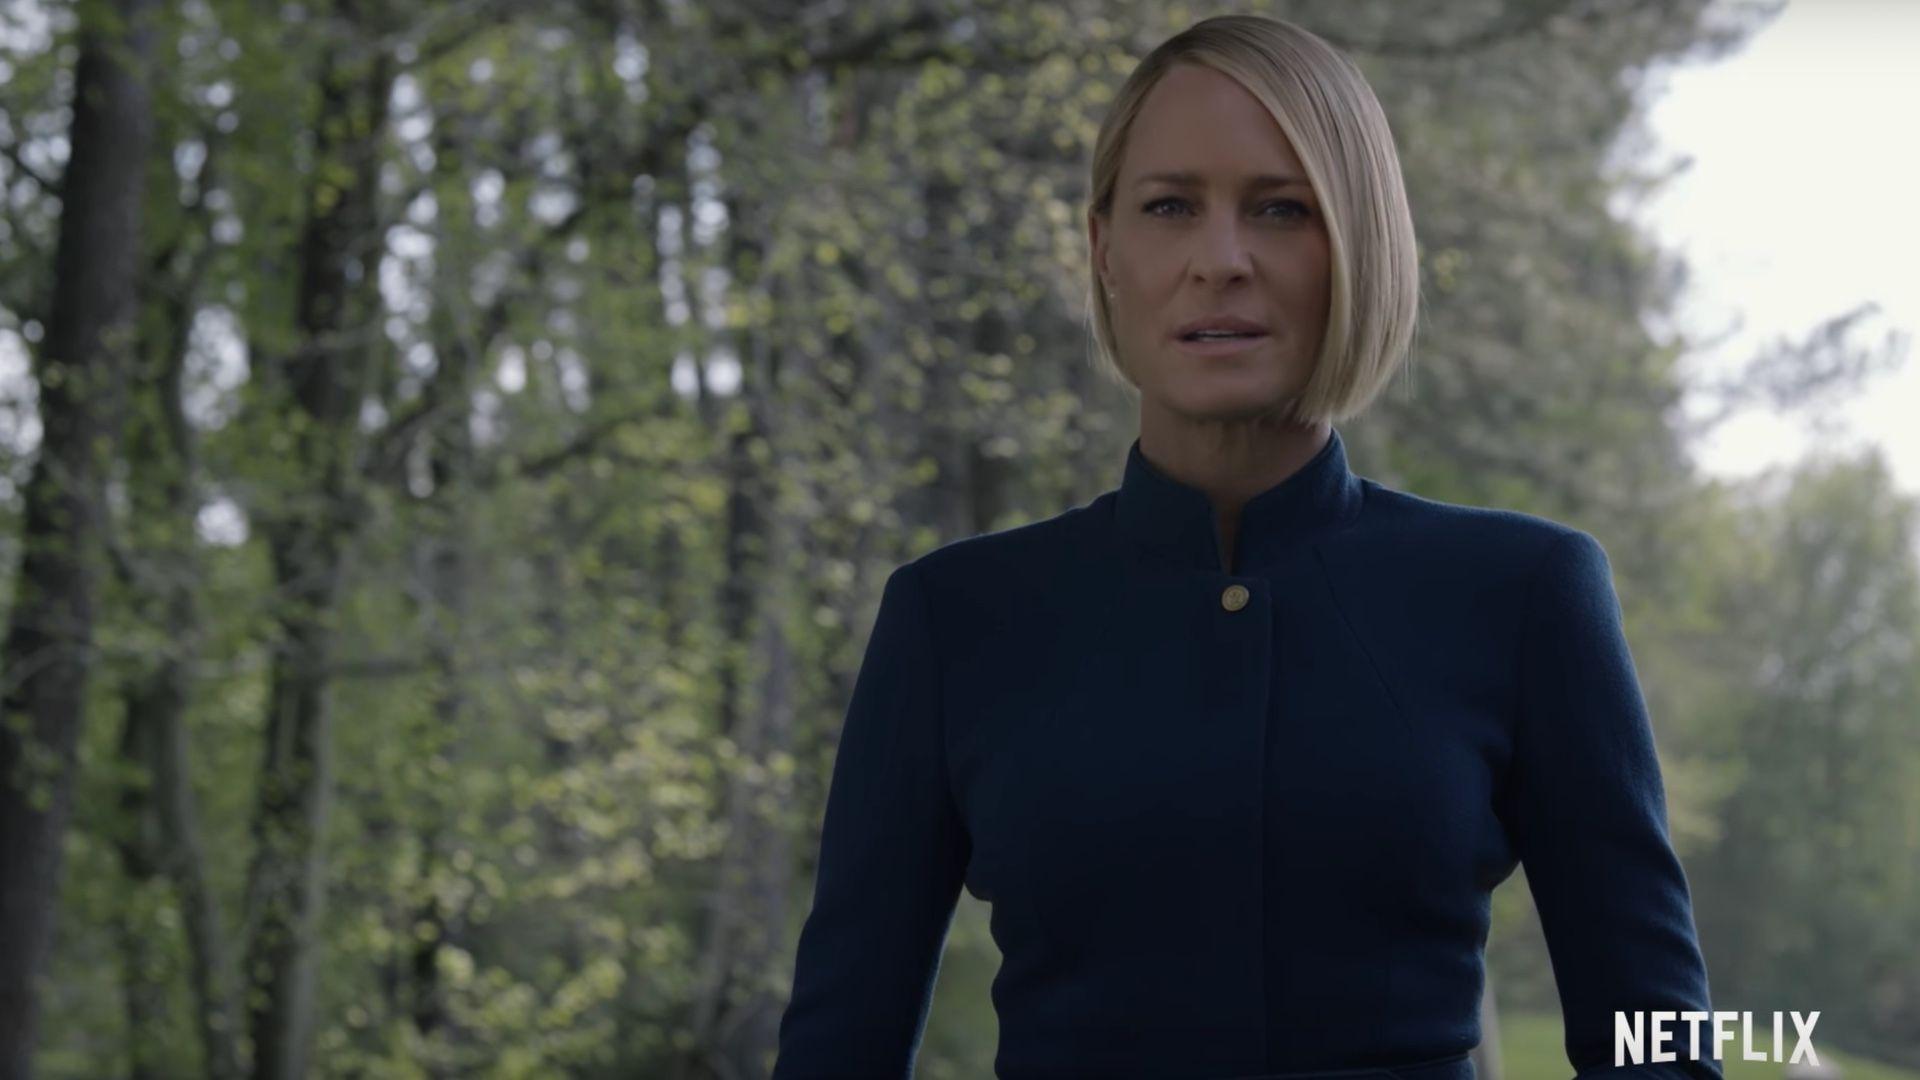 The Fate of Frank Underwood Revealed in New Teaser For HOUSE